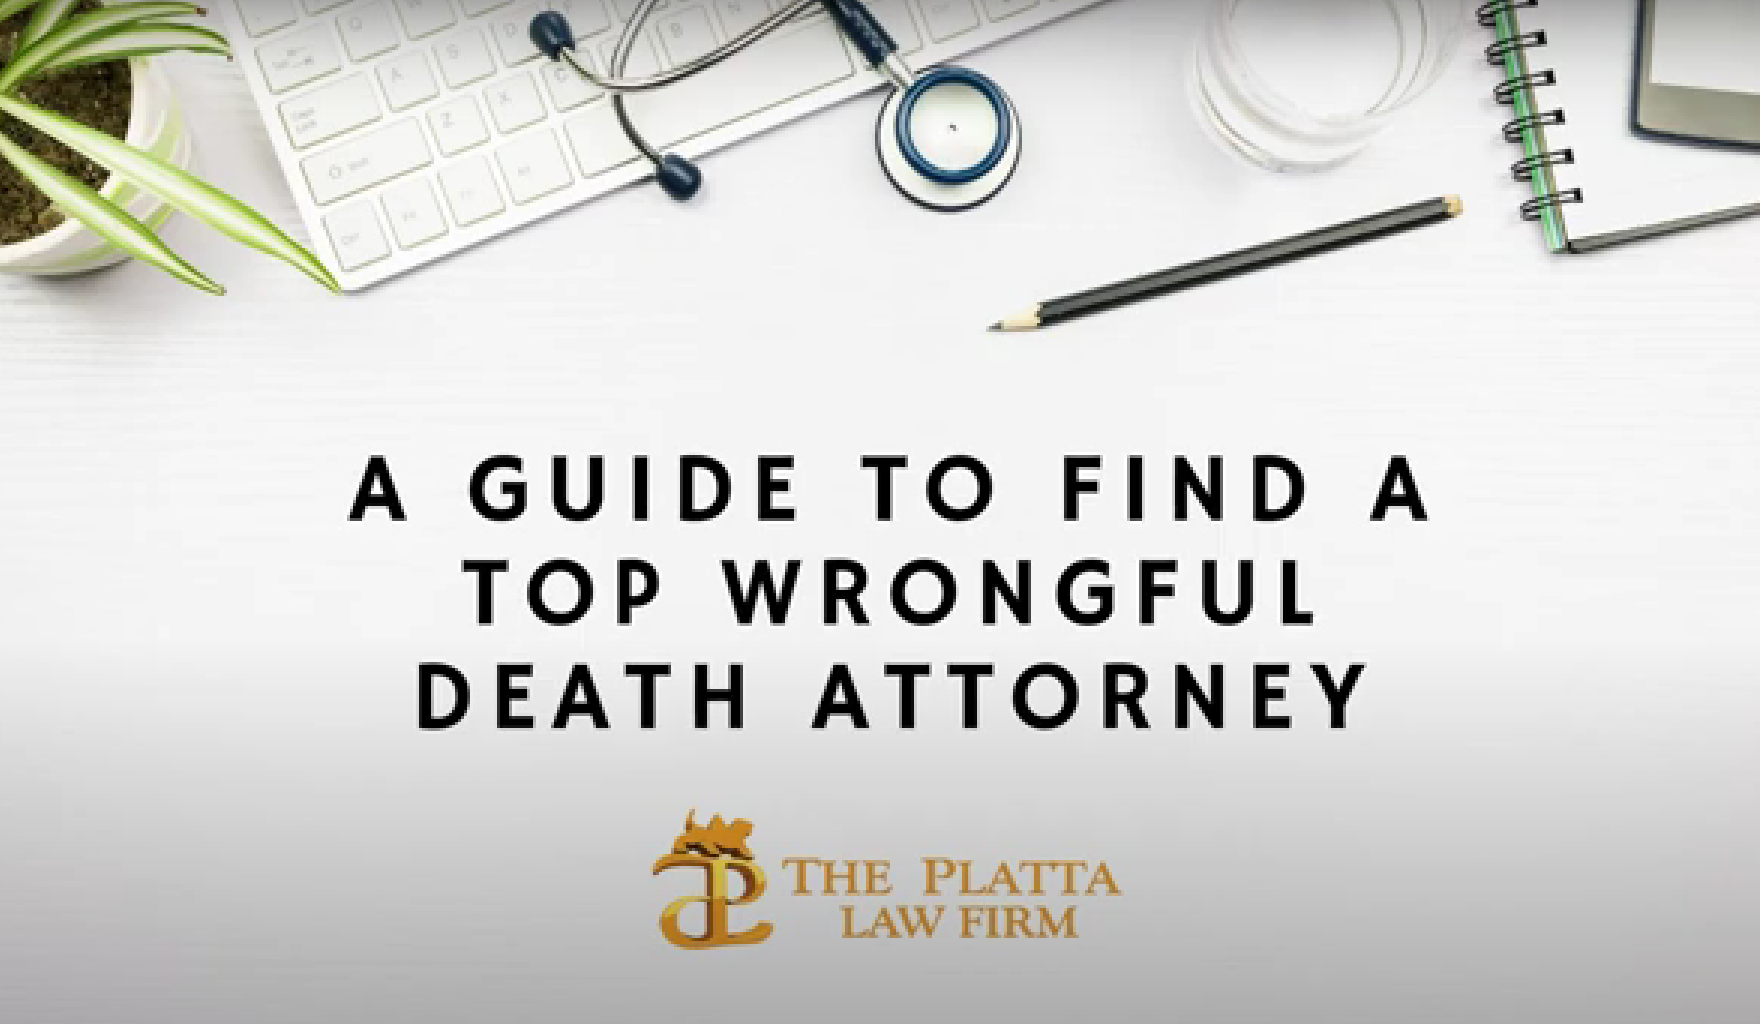 A GUIDE TO FIND A TOP WRONGFUL DEATH ATTORNEY